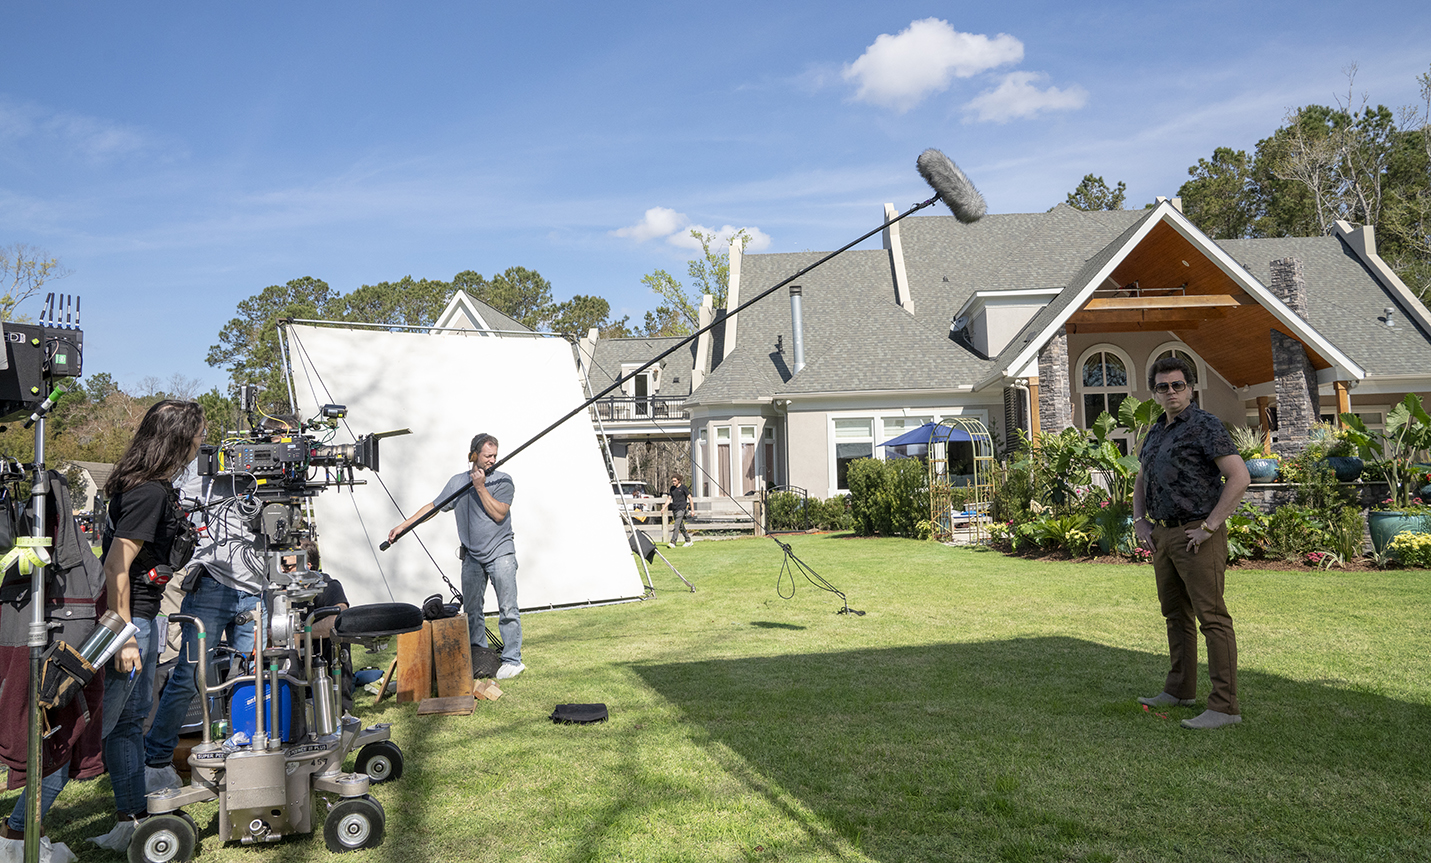 Film and television writer, actor and producer Danny McBride (right) portrays Jesse Gemstone during taping of the HBO hit series The Righteous Gemstones as crewmembers (left) set up for a scene in the Charleston area. (Photo/Fred Norris, HBO)